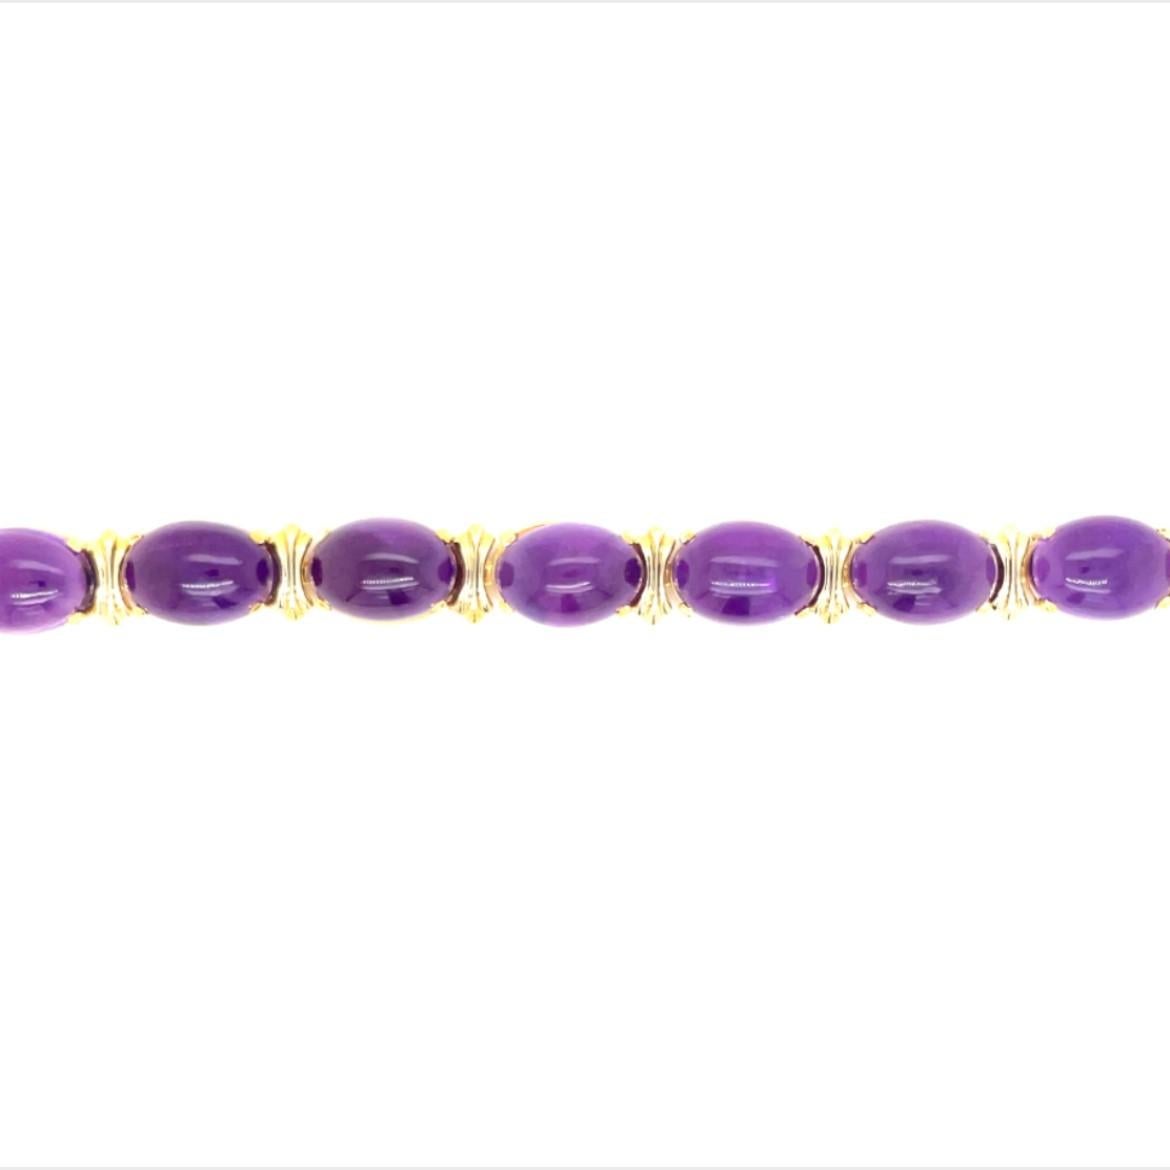 88tcw Cabochon Amethyst - 11 stones
14k Yellow Gold
8 inches in length